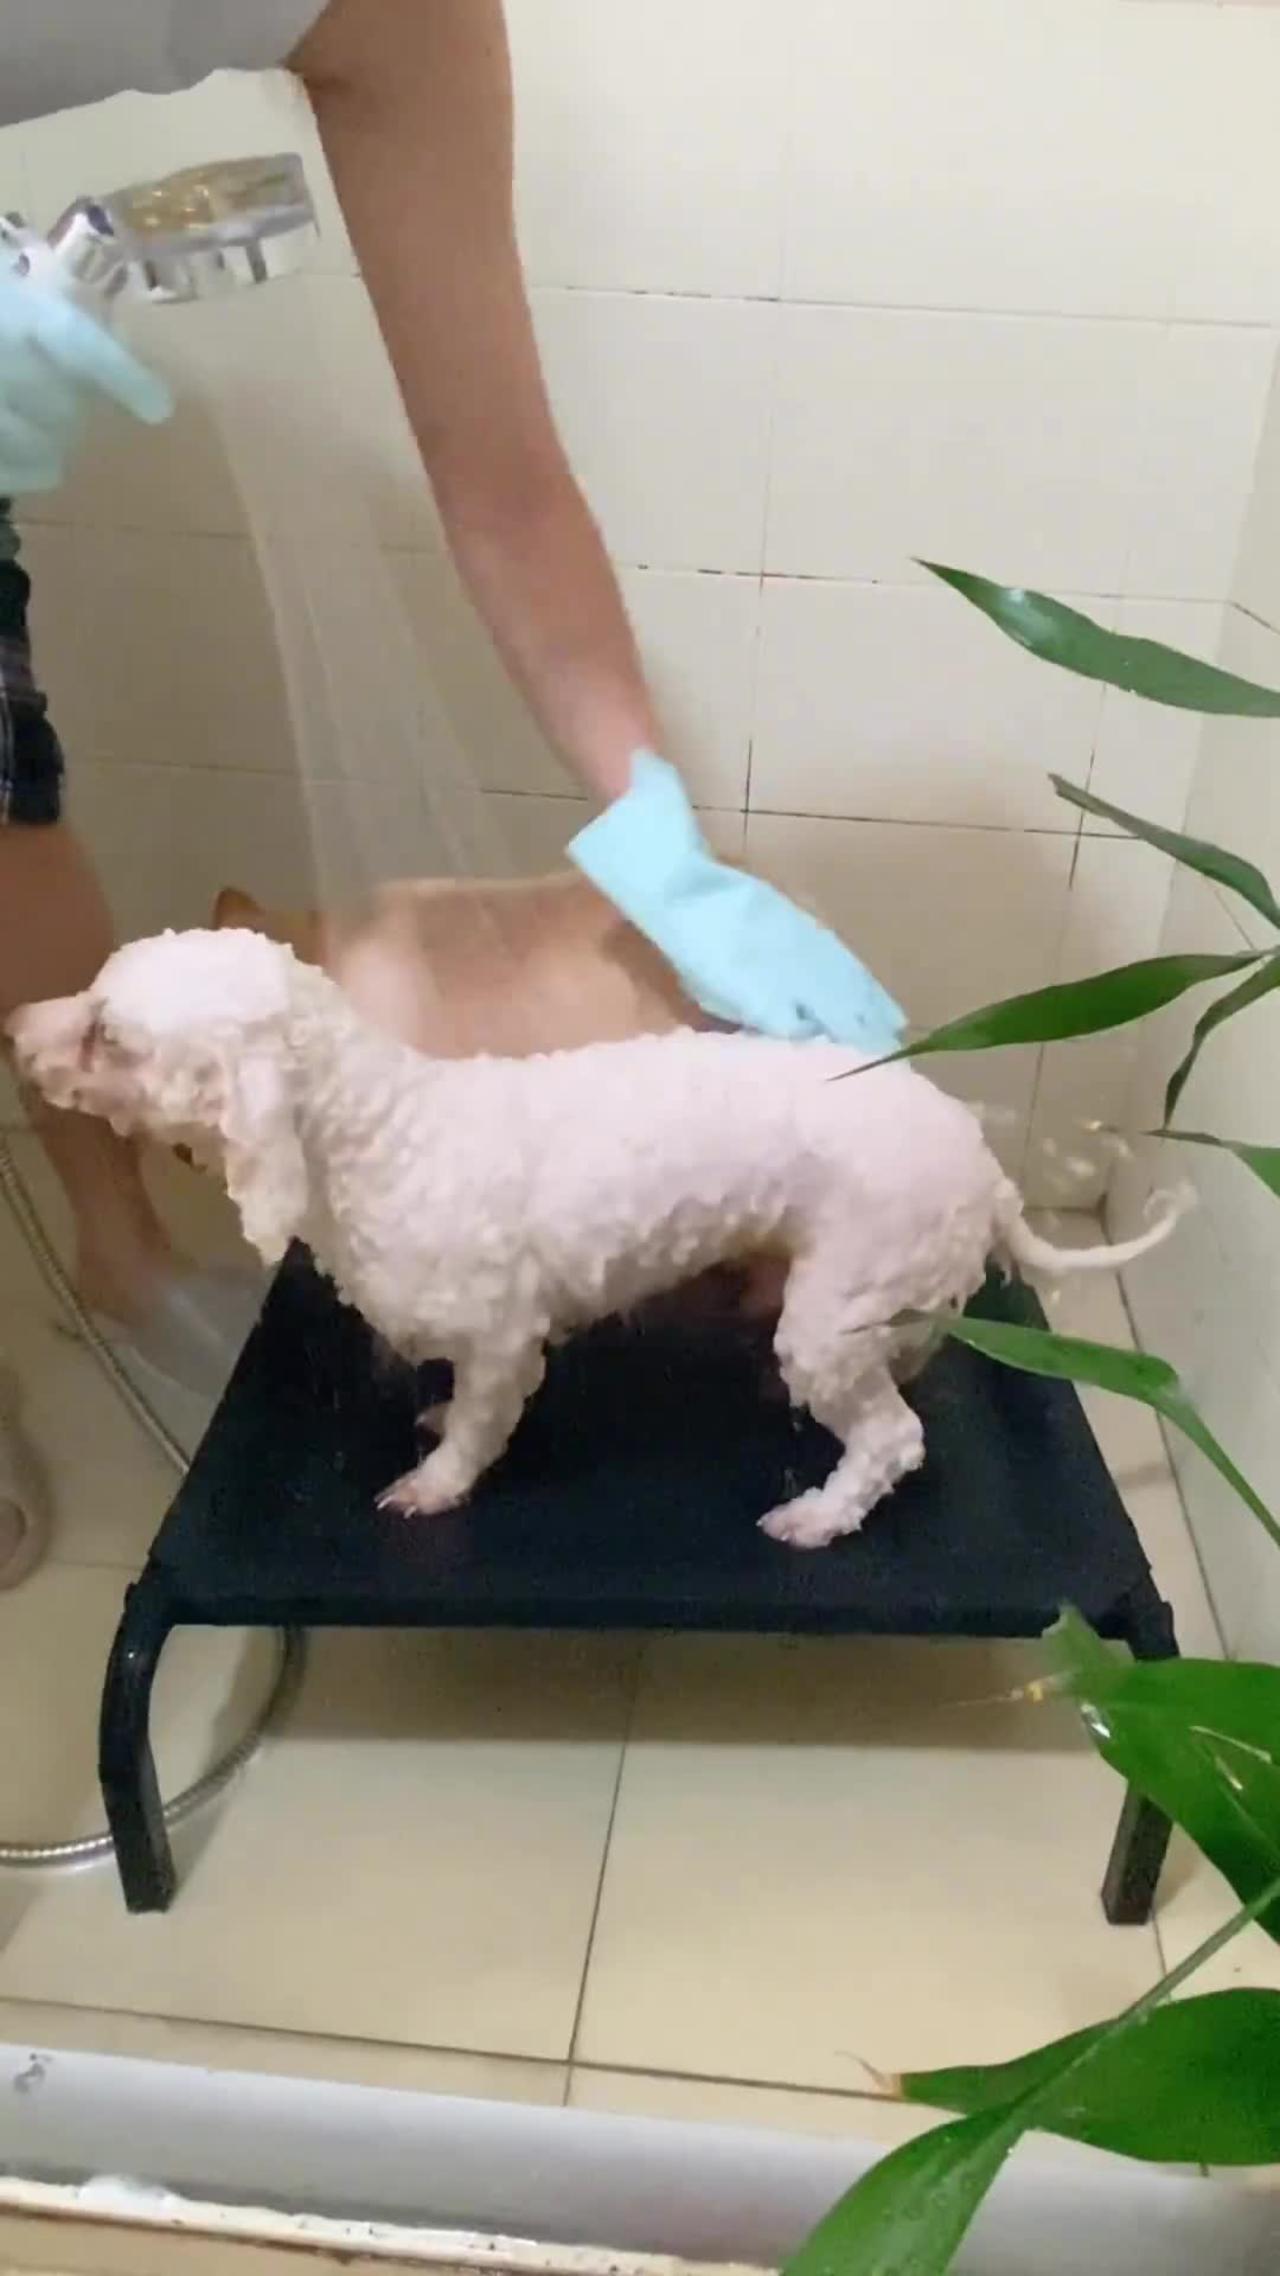 "Protecting your skin while washing your dog: Using gloves with detergent"